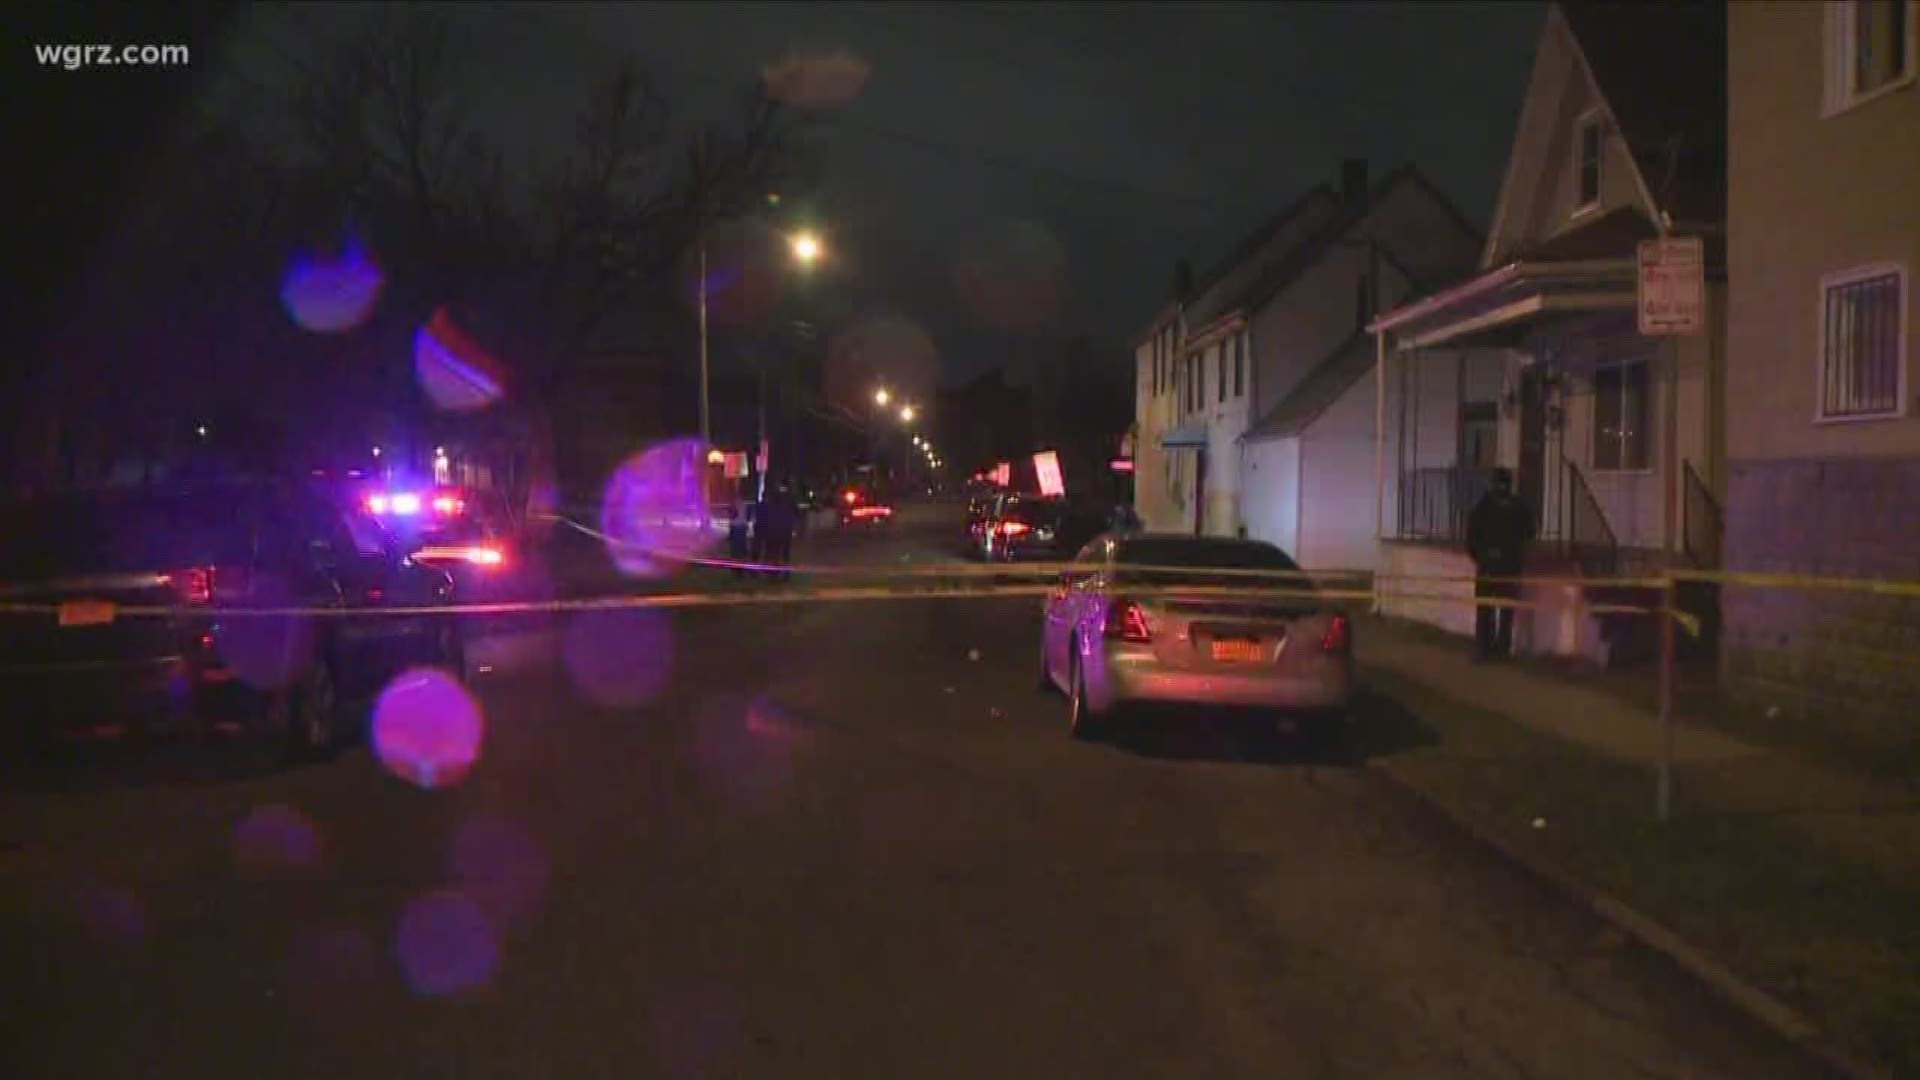 Buffalo Police need help figuring out what led up to the shooting death of a 19-year-old man early this morning. This is the scene near Sperry Park.